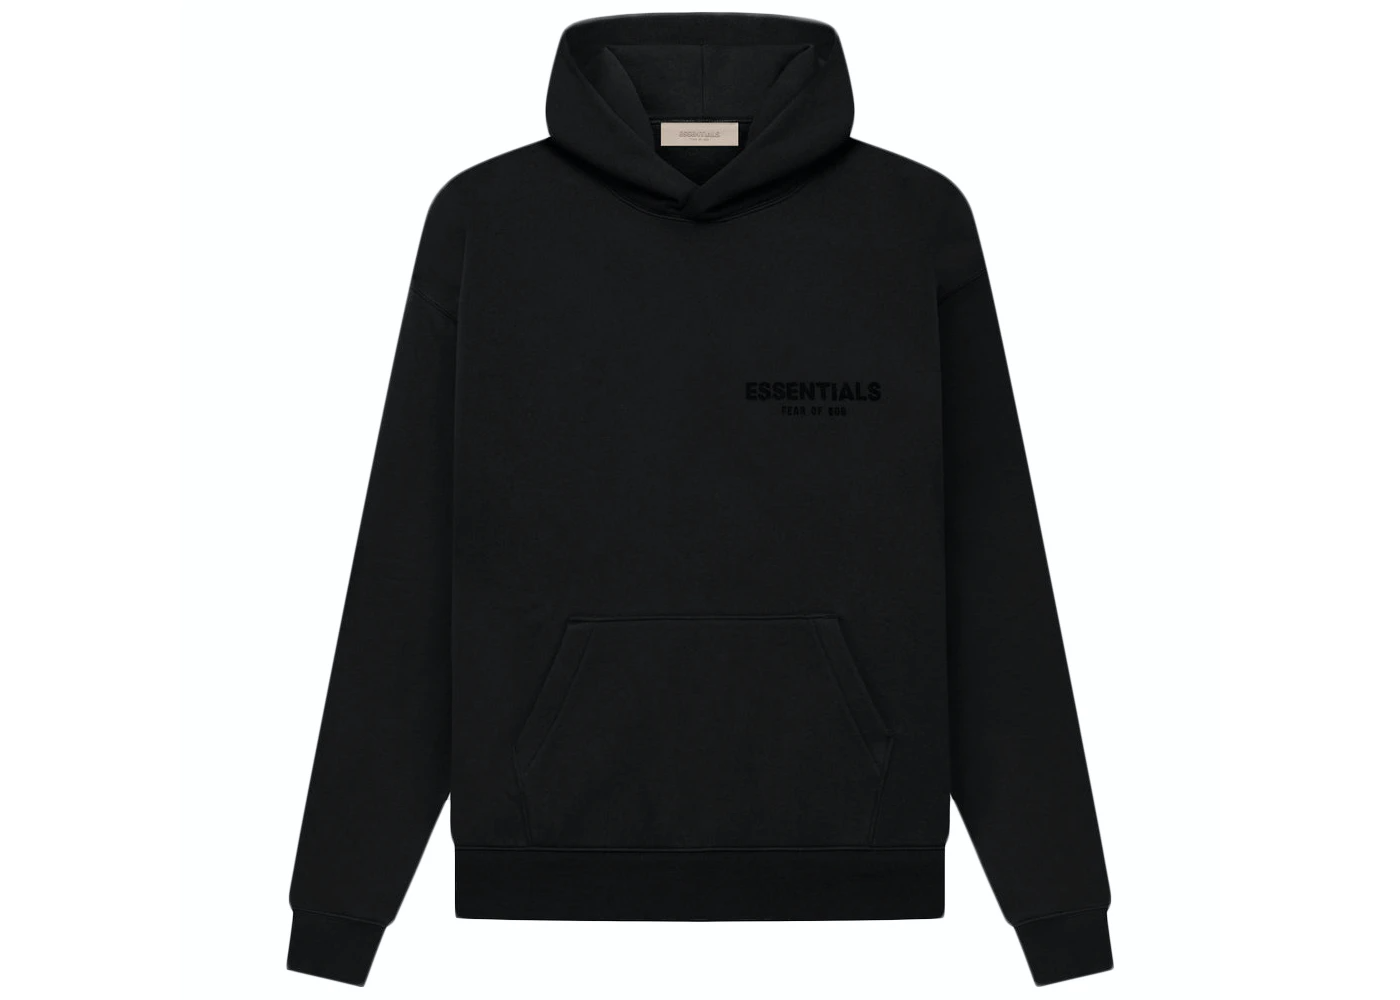 FEAR OF GOD ESSENTIALS SS22 PULLOVER ‘BLACK’ Large – RpshoppingHQ